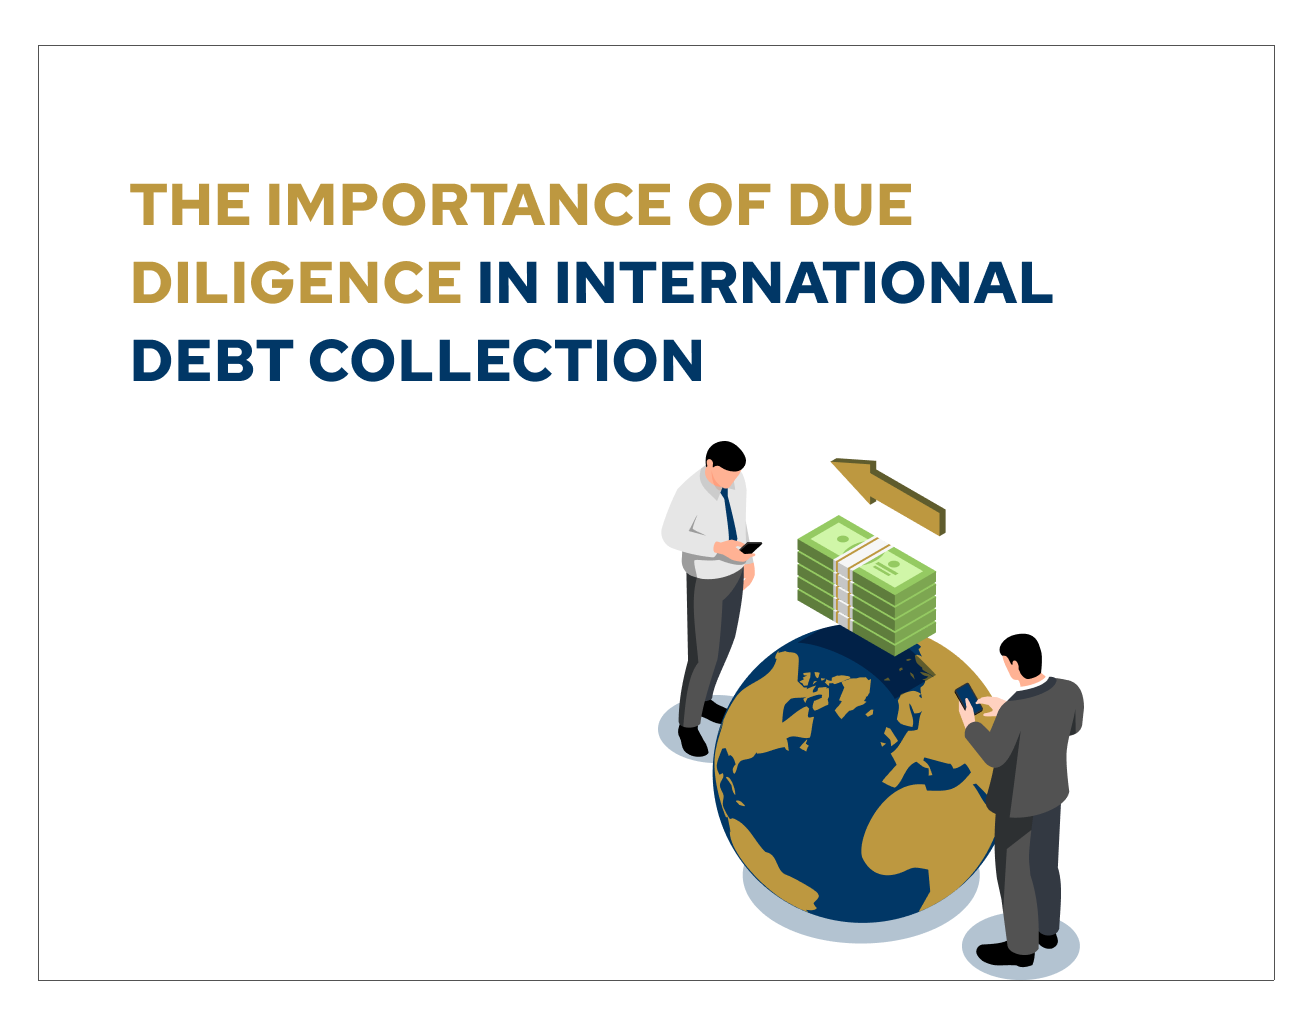 The importance of due diligence in International debt collection